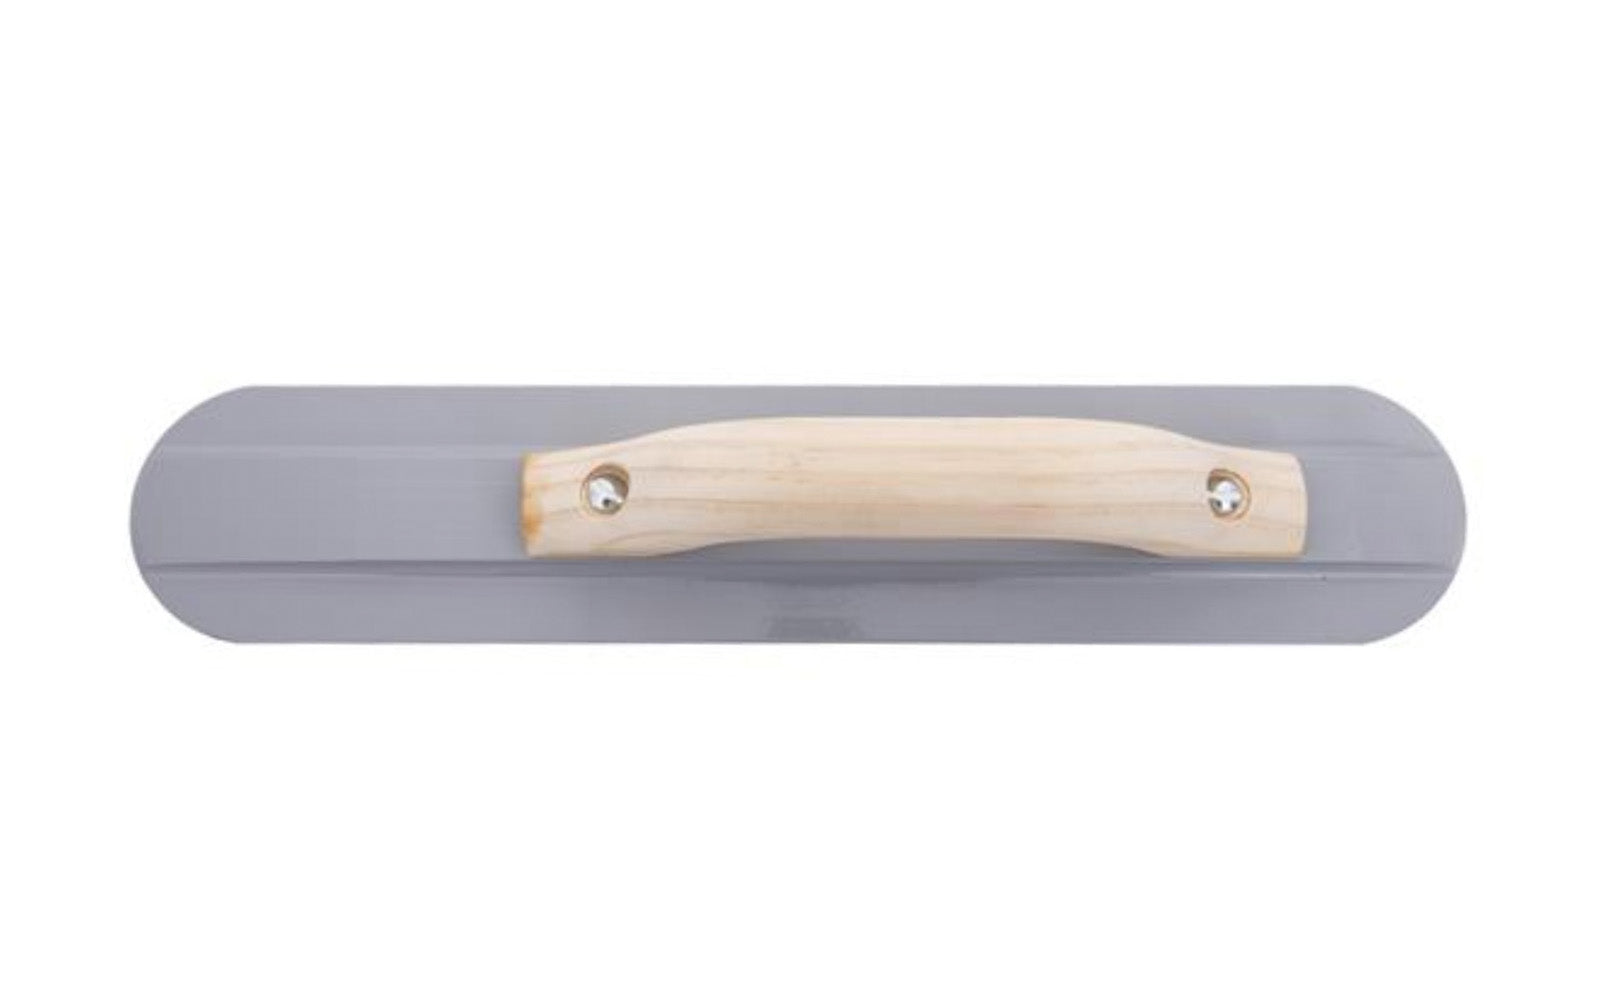 This Marshalltown 16" x 3-1/8"  Round Magnesium Hand Float is ideal for preparing your concrete surface for troweling. Fully rounded ends eliminate float marks. The durable, lightweight magnesium blade material works well with air entrained concrete.